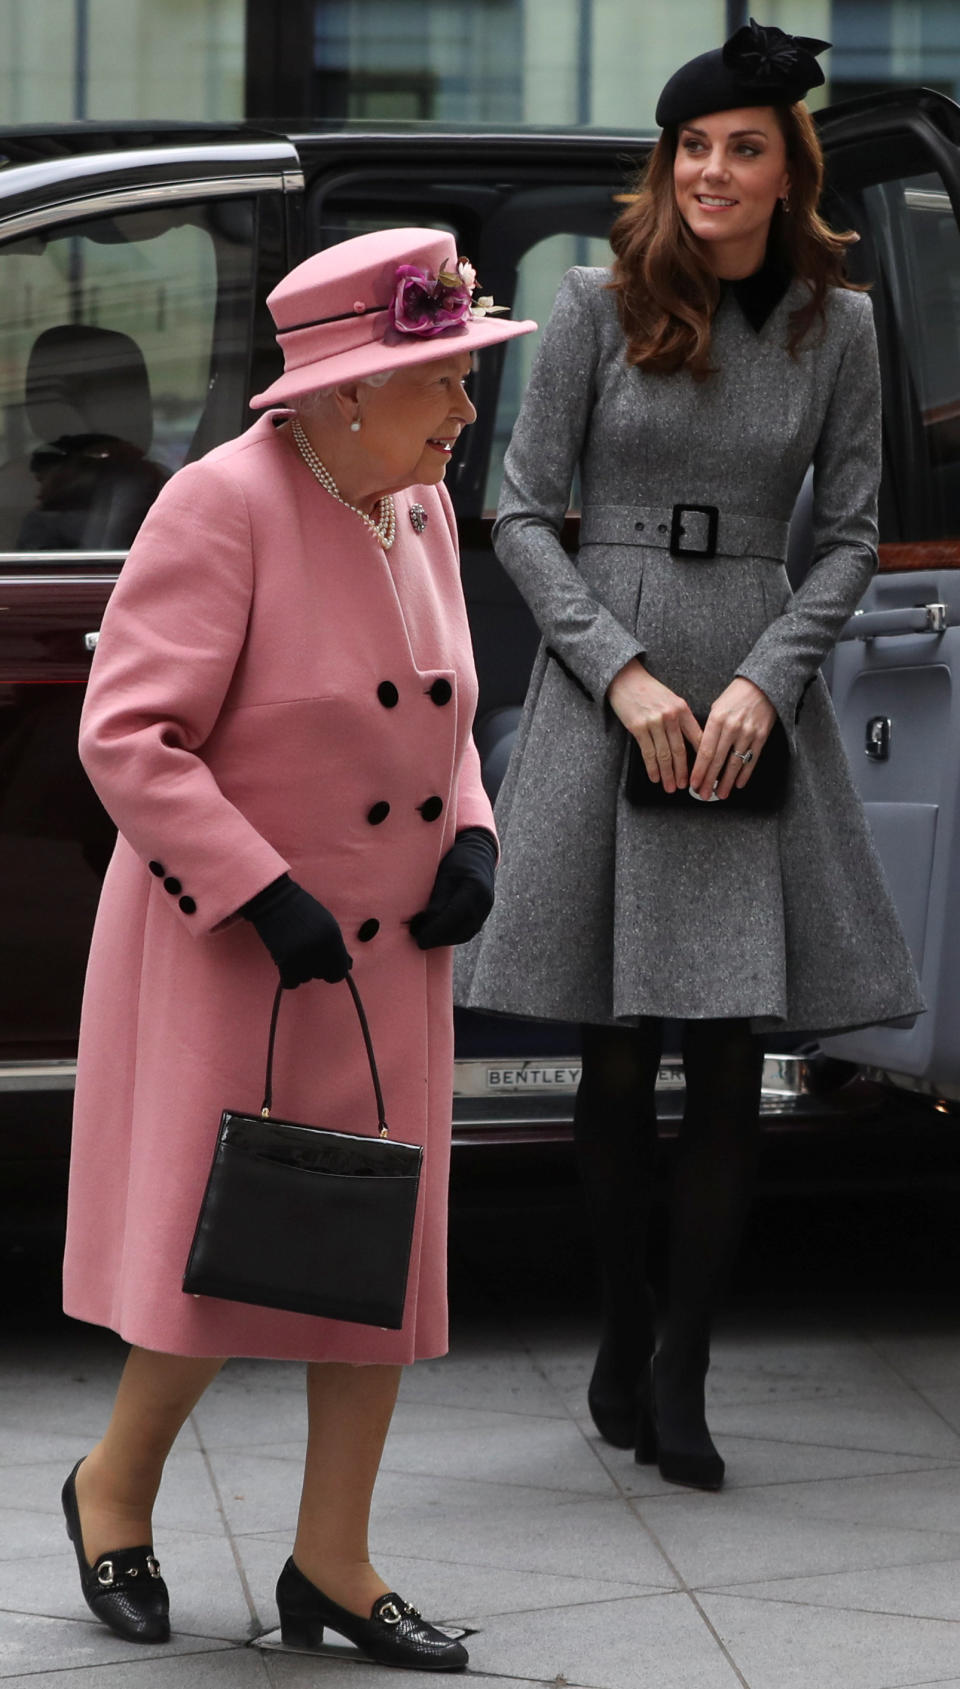 This is the first time the Duchess of Cambridge, and the queen have made a joint appearance together at a royal engagement. (Photo: Simon Dawson / Reuters)